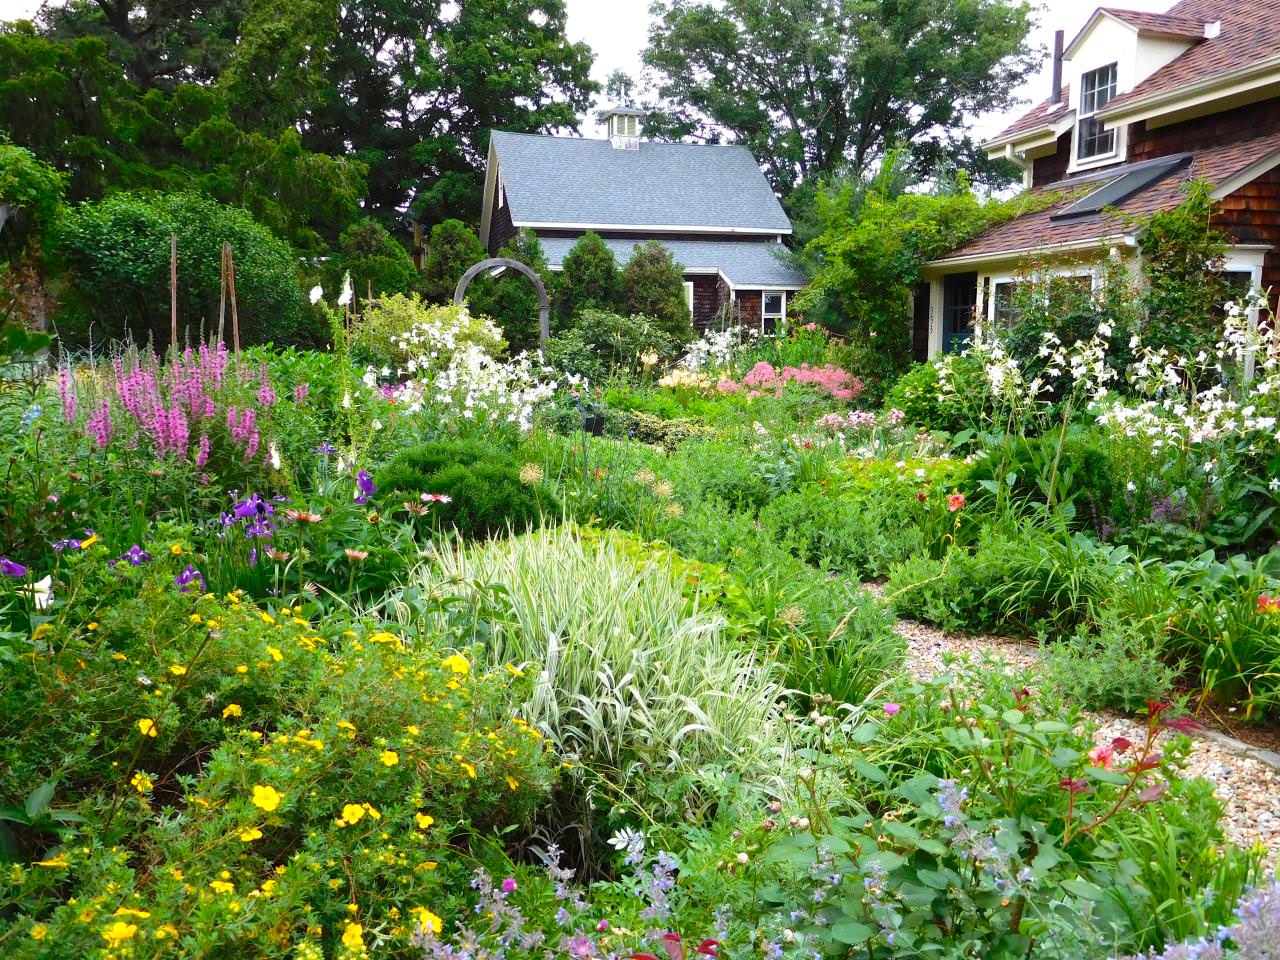 Native Gardens that we support with design and Maintenance in 2023